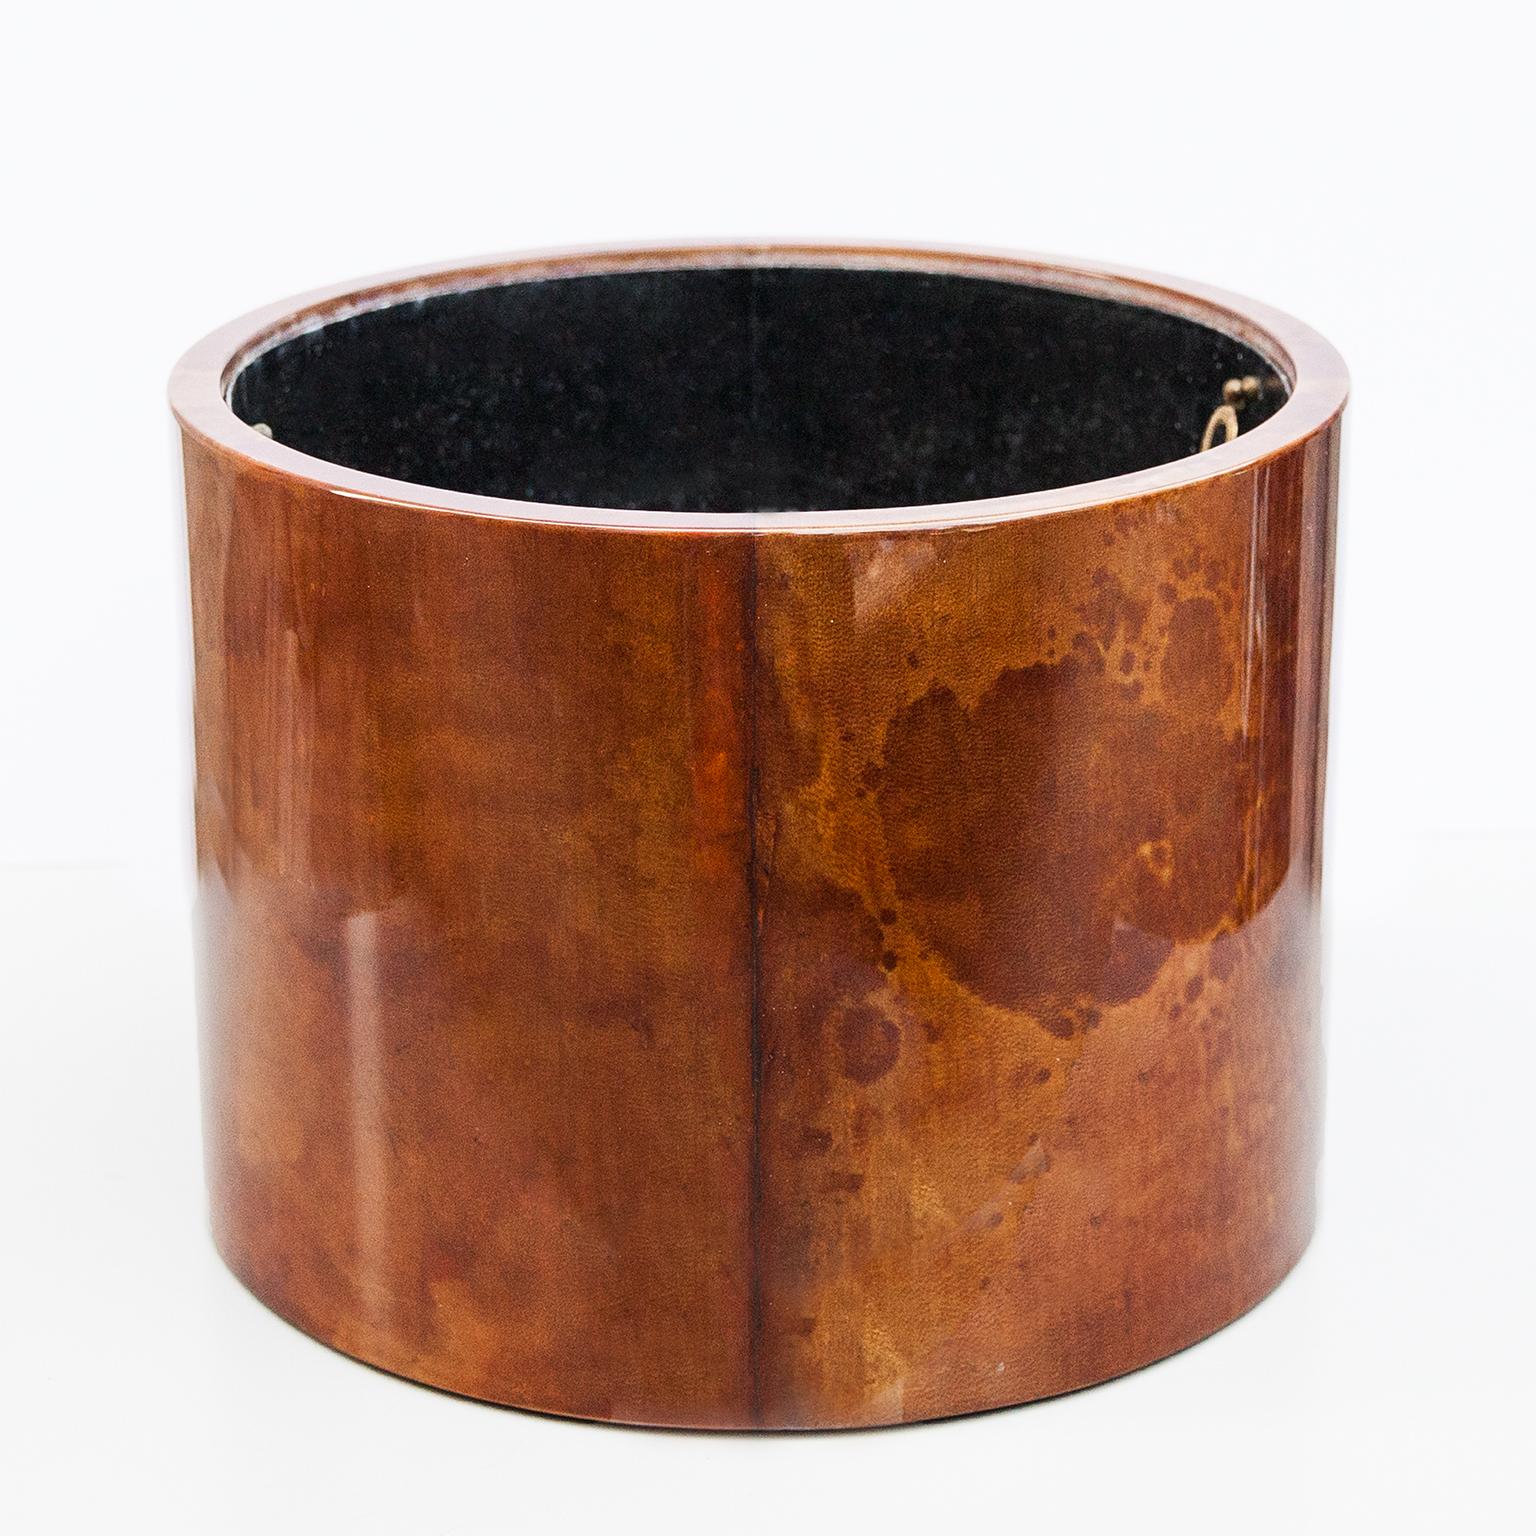 This elegant Aldo Tura planter has a wooden frame covered with tobacco color goatskin, varnished in clear acrylic lacquer.

This particular planter was executed, circa 1980 and is in perfect condition. Along with artists like Piero Fornasetti and